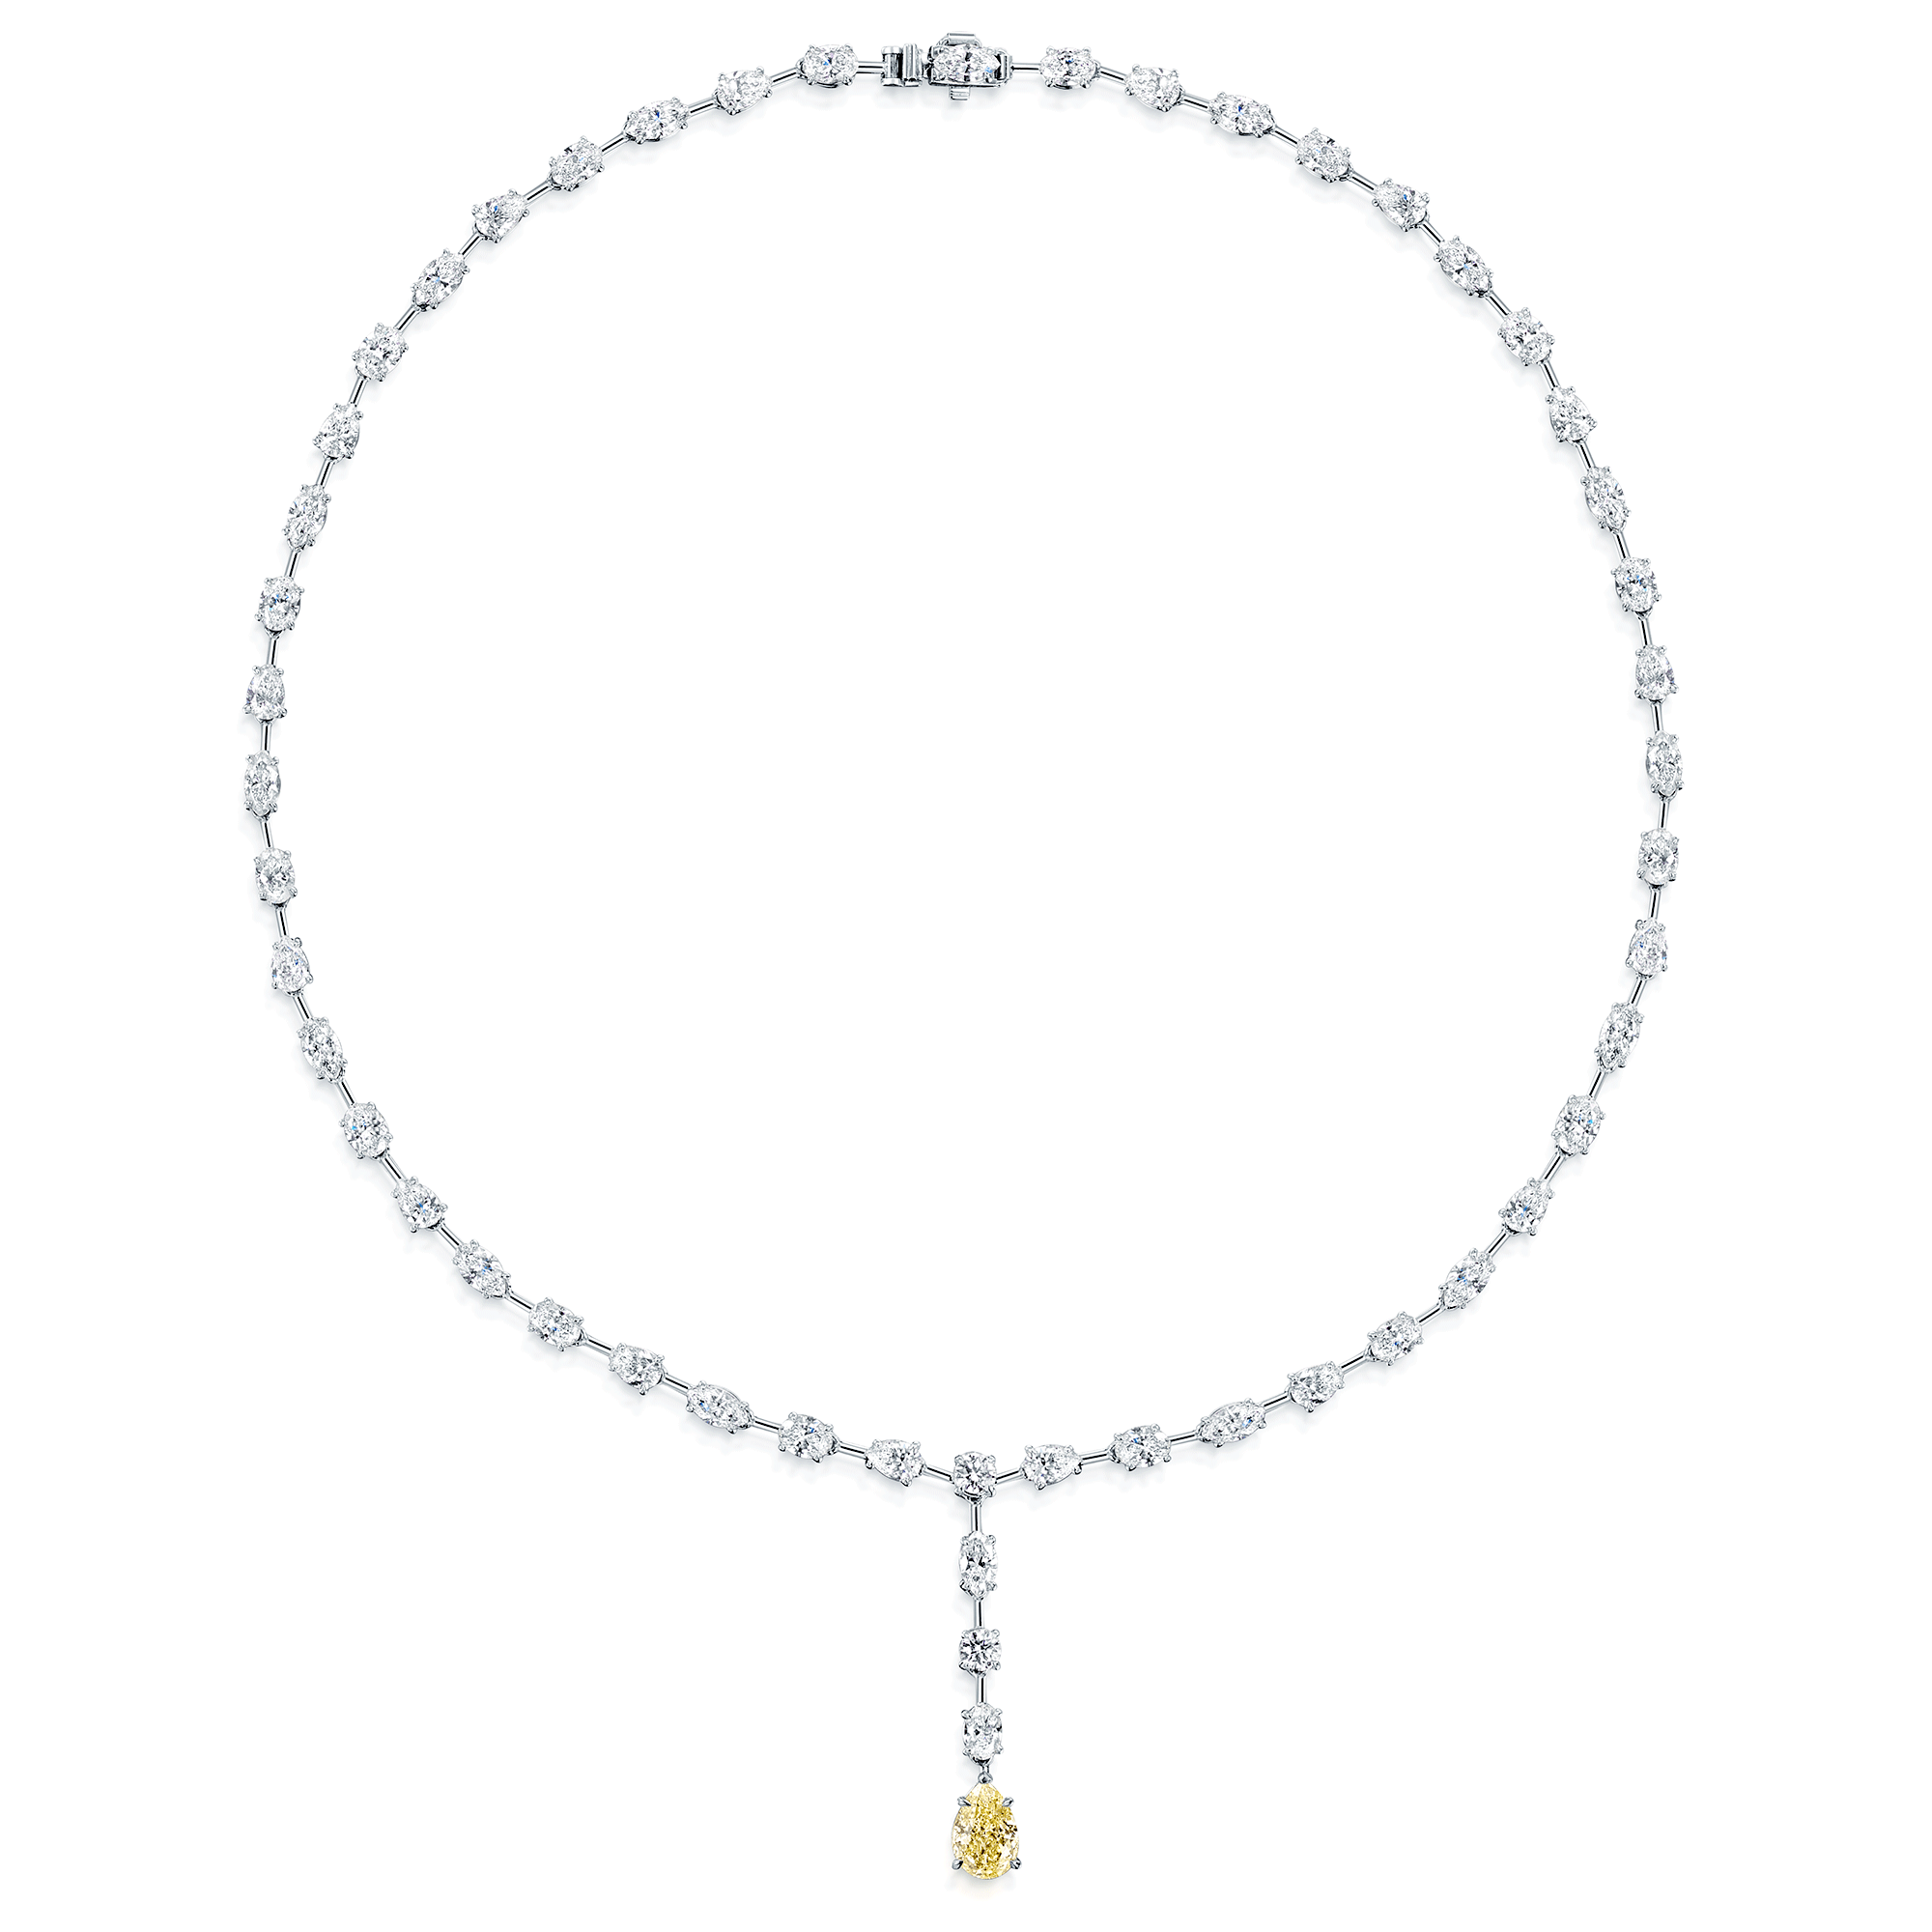 18ct White Gold Pear Cut Fancy Yellow Diamond Necklet With Mixed Cut Diamond Surrounding